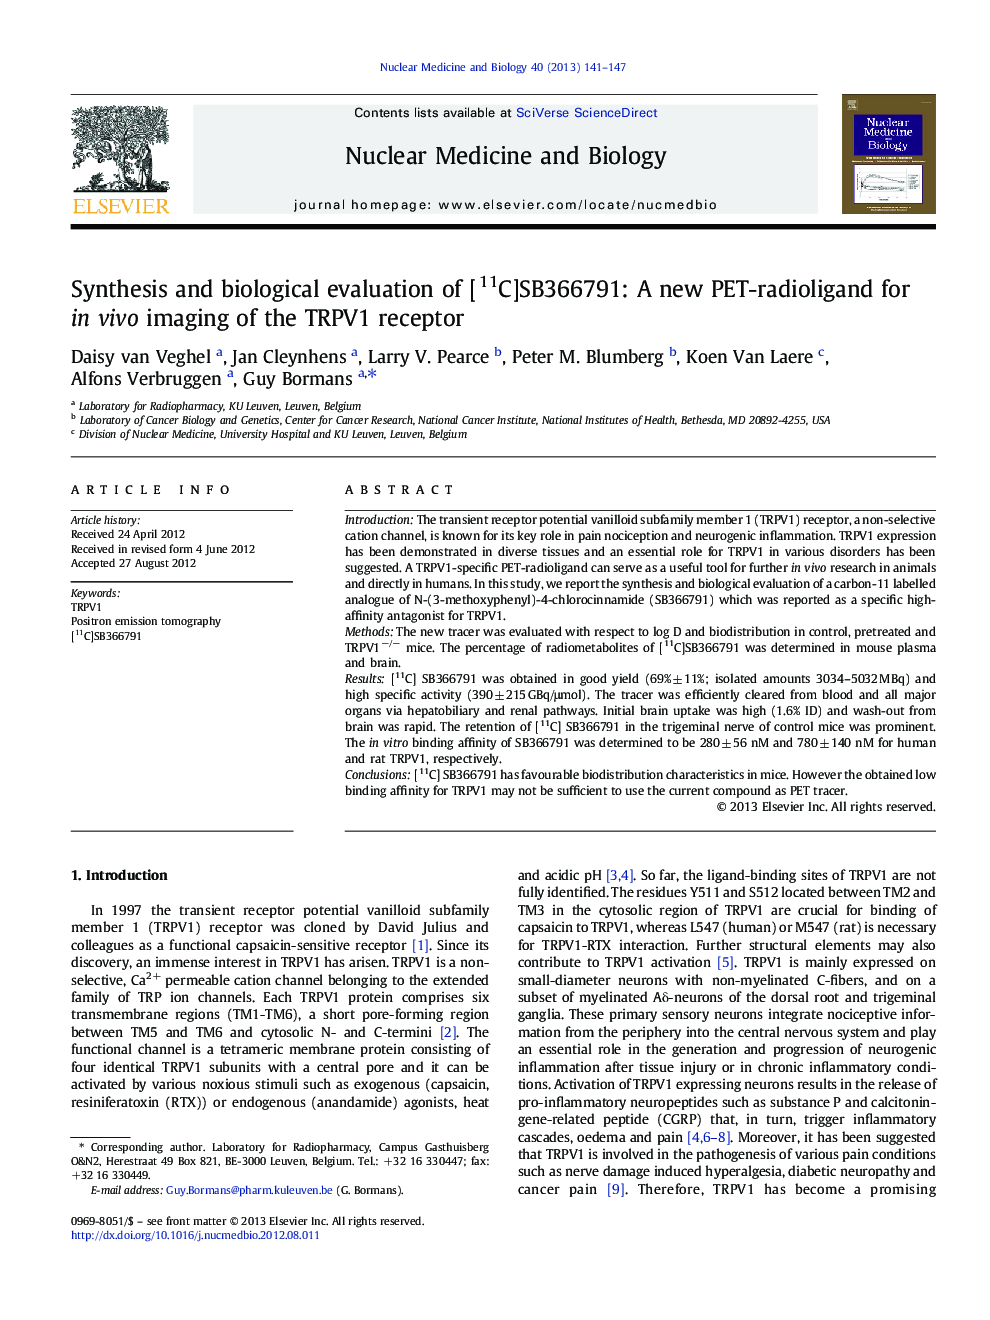 Synthesis and biological evaluation of [11C]SB366791: A new PET-radioligand for in vivo imaging of the TRPV1 receptor